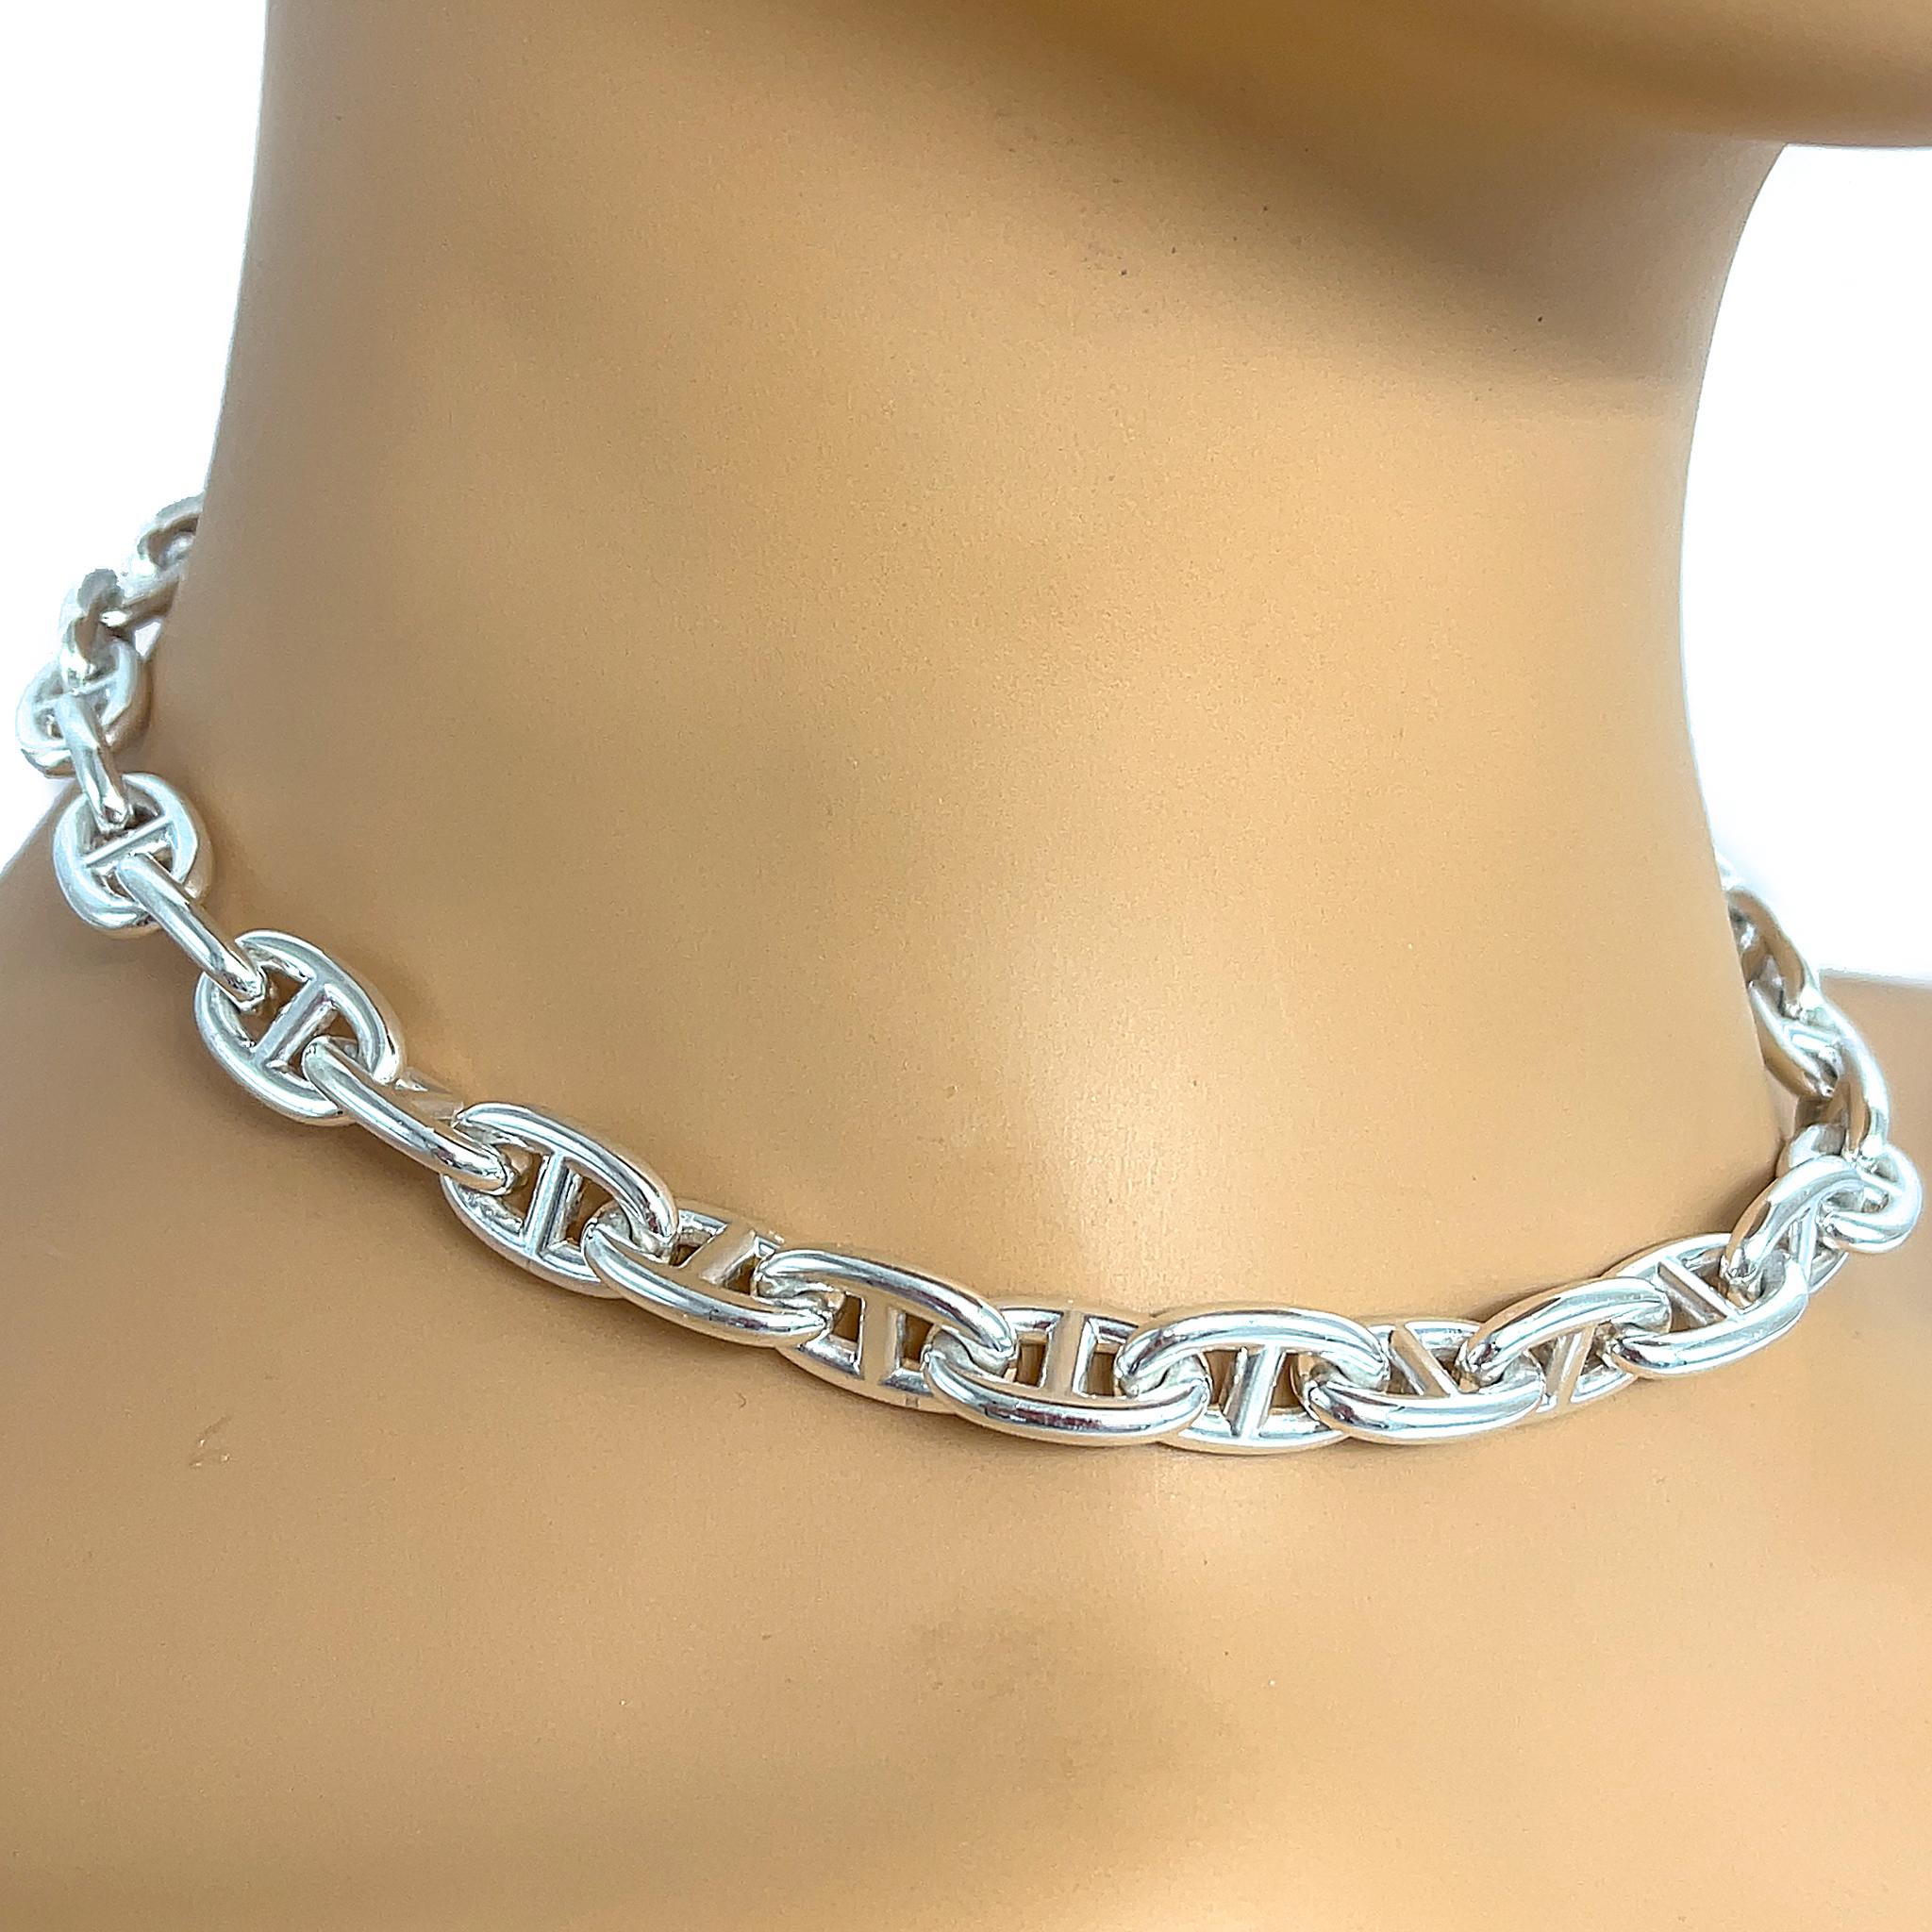 Sterling Silver
Total Weight: 106 grams
Length: 17 inches